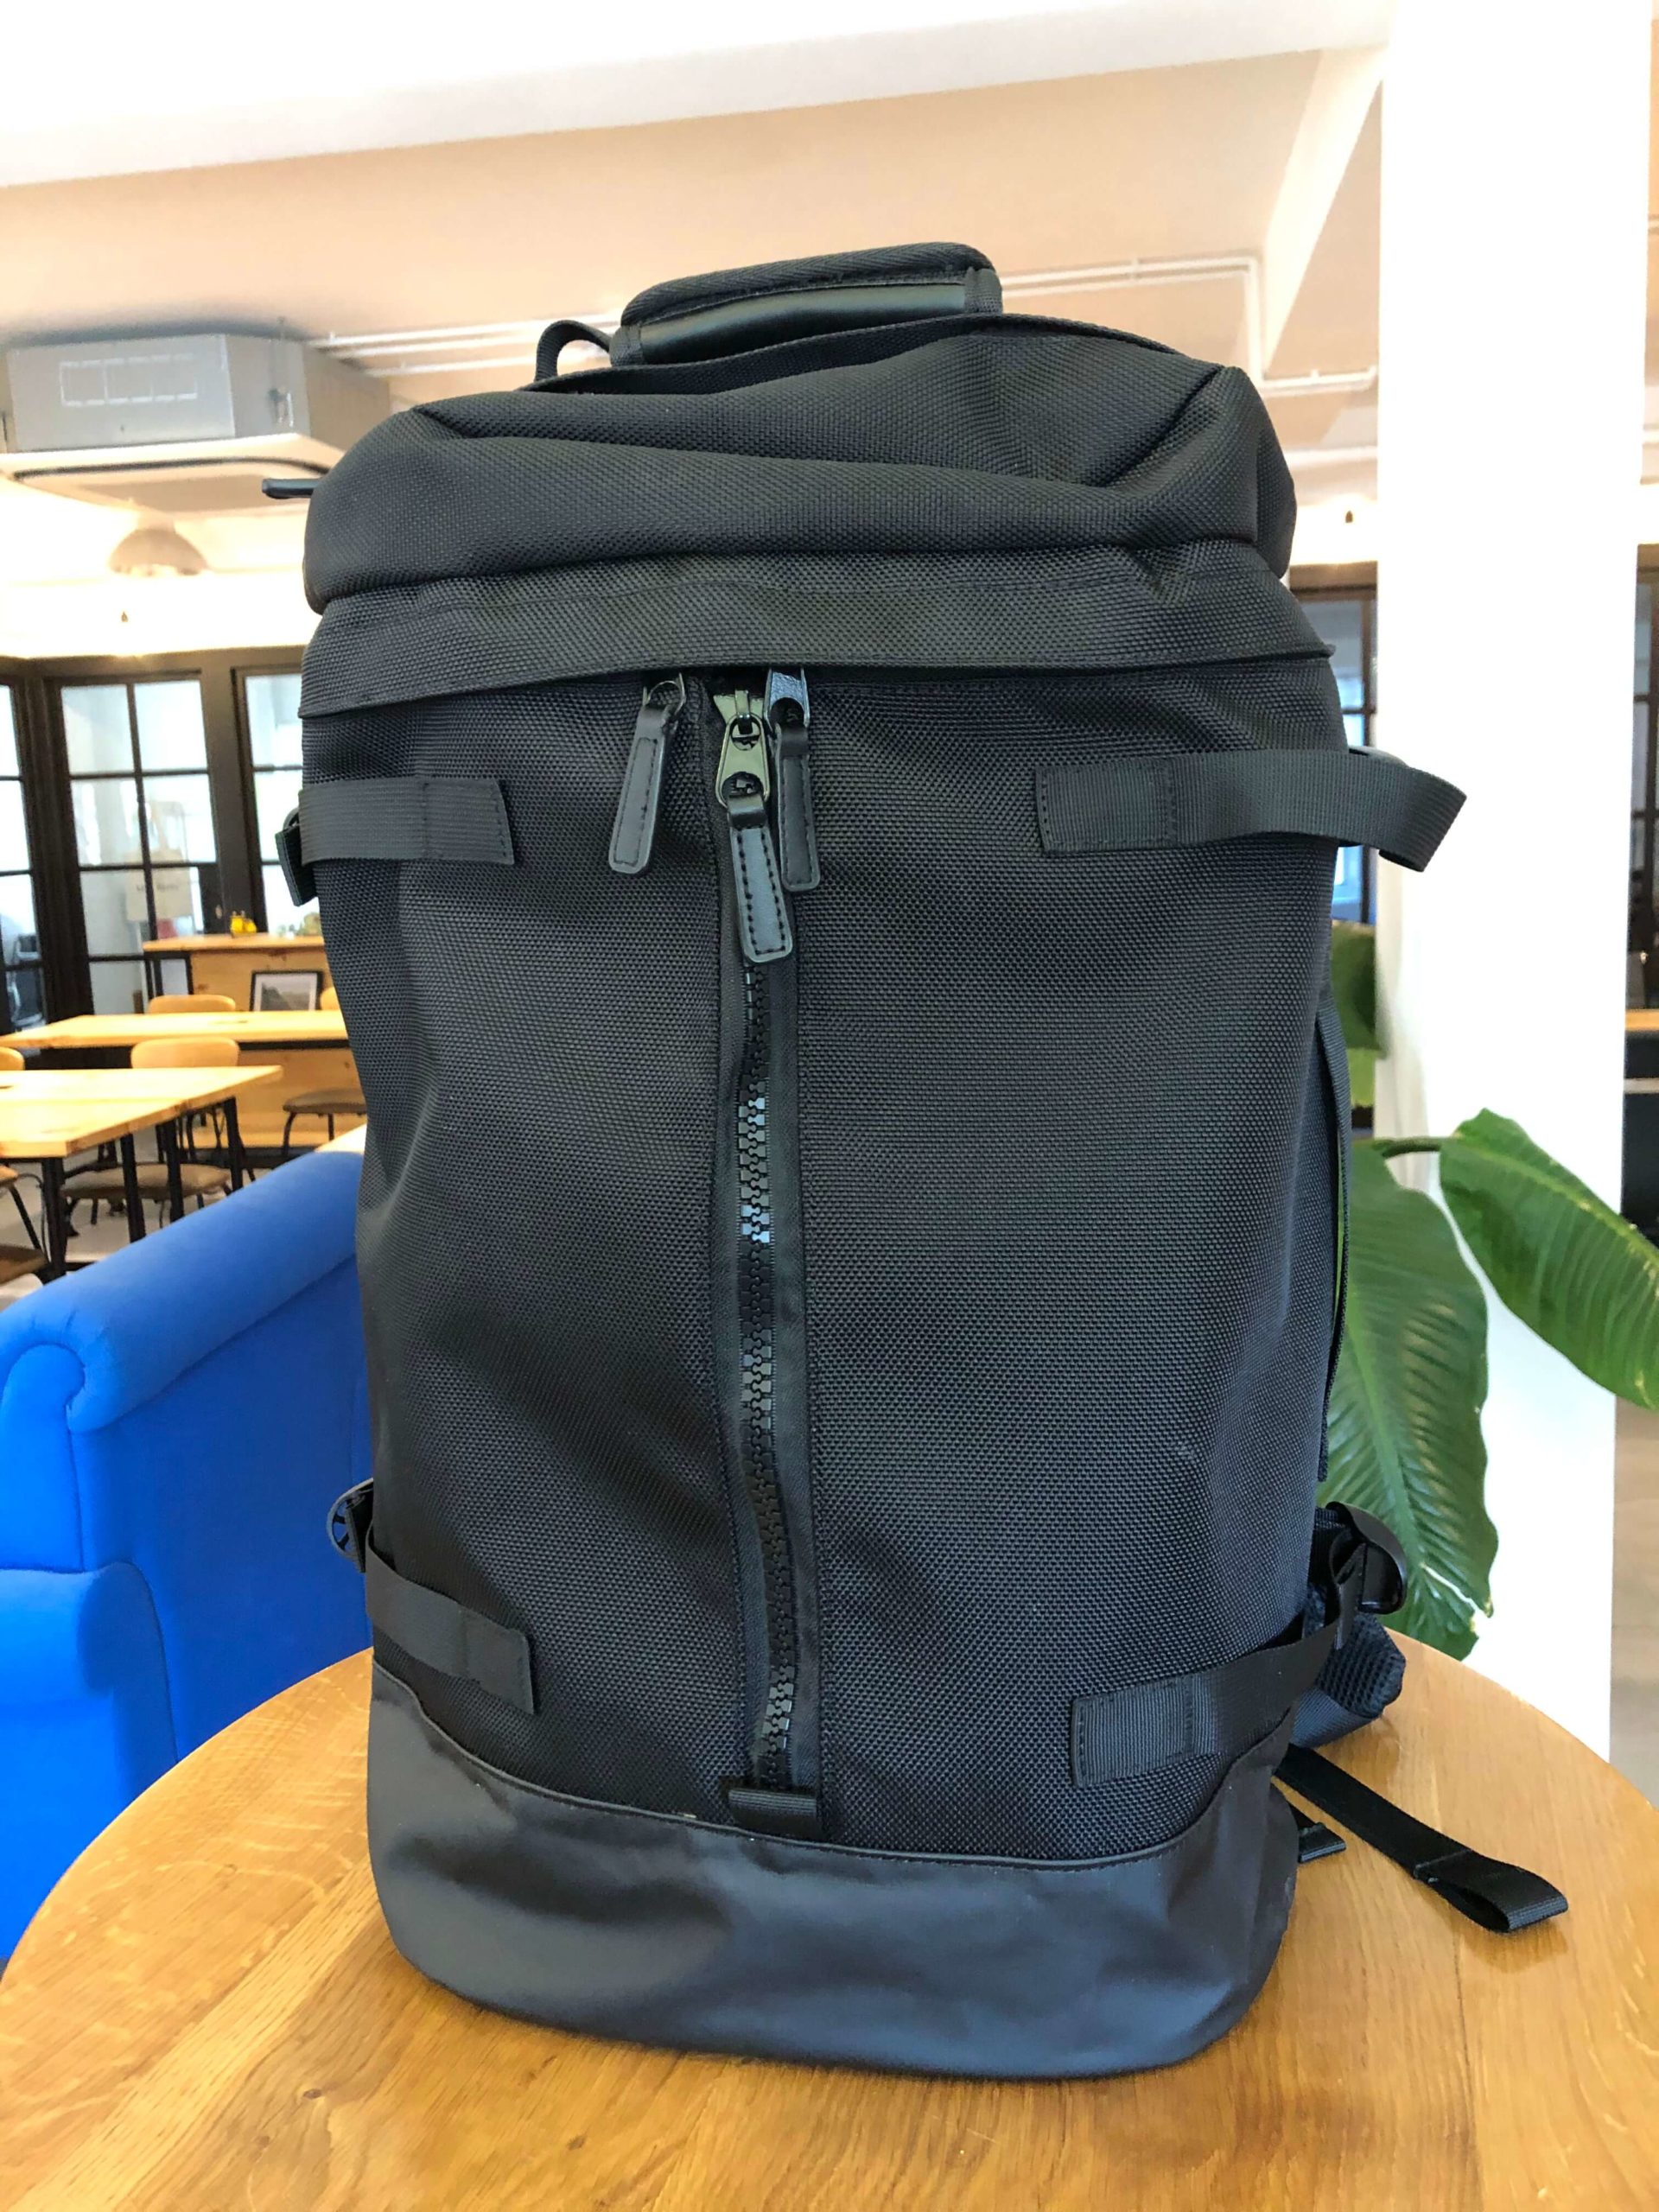 Everyman Hideout Backpack Review